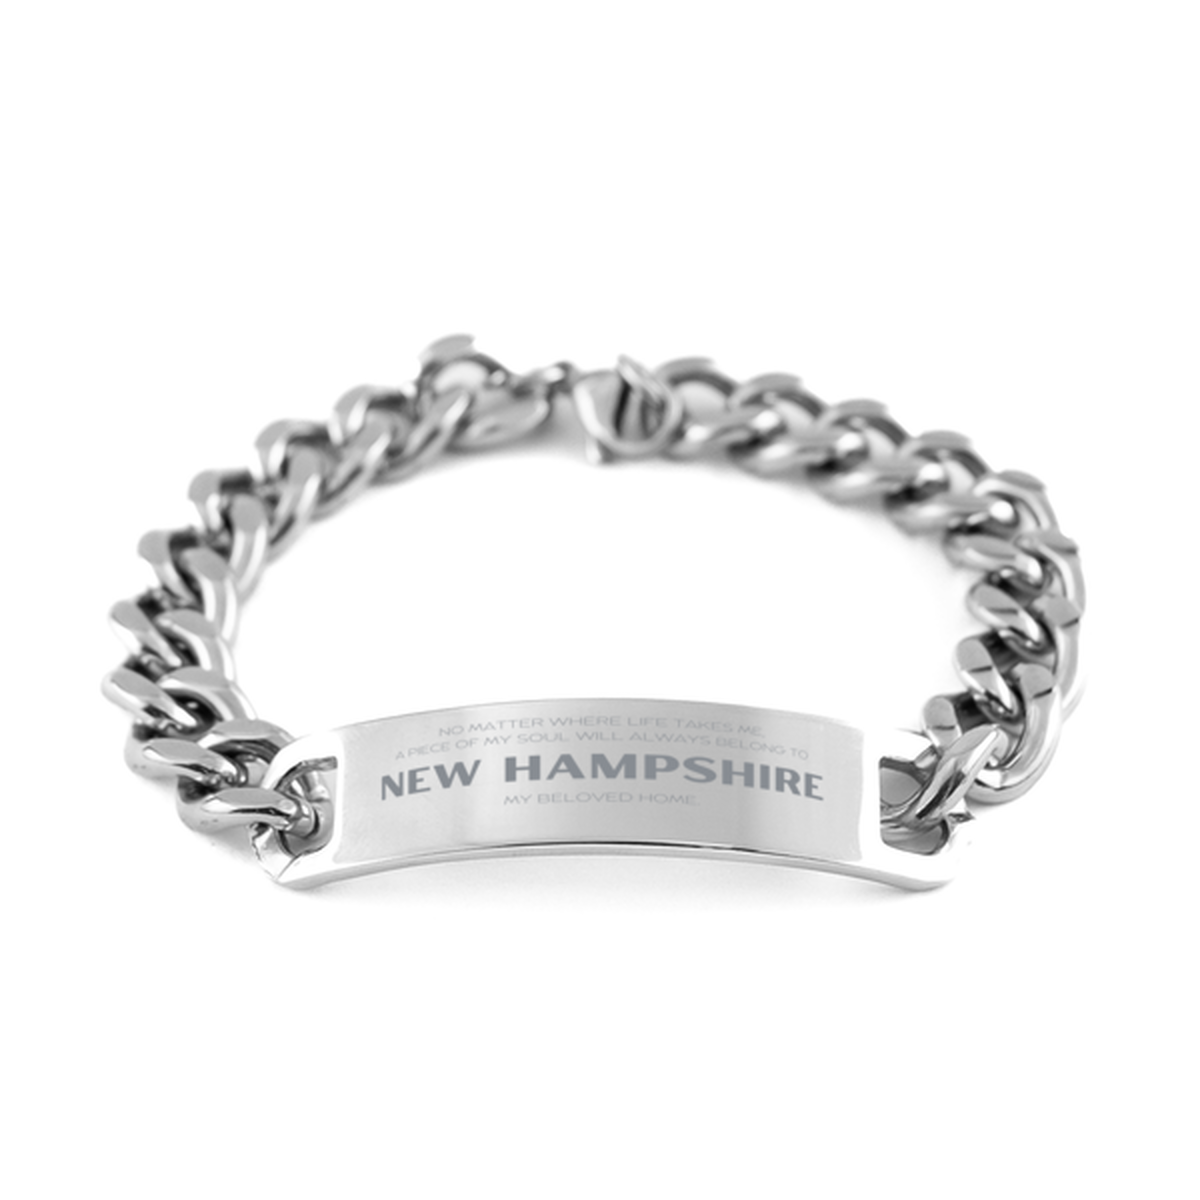 Love New Hampshire State Gifts, My soul will always belong to New Hampshire, Proud Cuban Chain Stainless Steel Bracelet, Birthday Unique Gifts For New Hampshire Men, Women, Friends